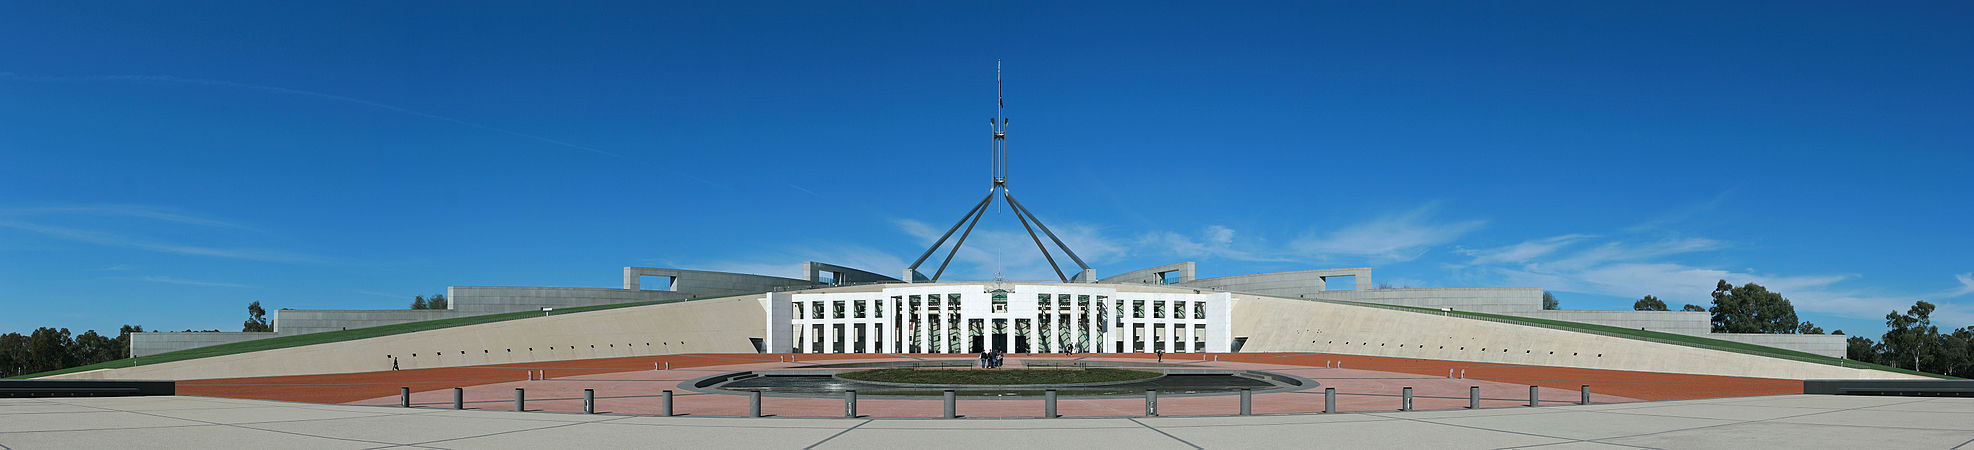 Parliament House, Canberra, by John O'Neill